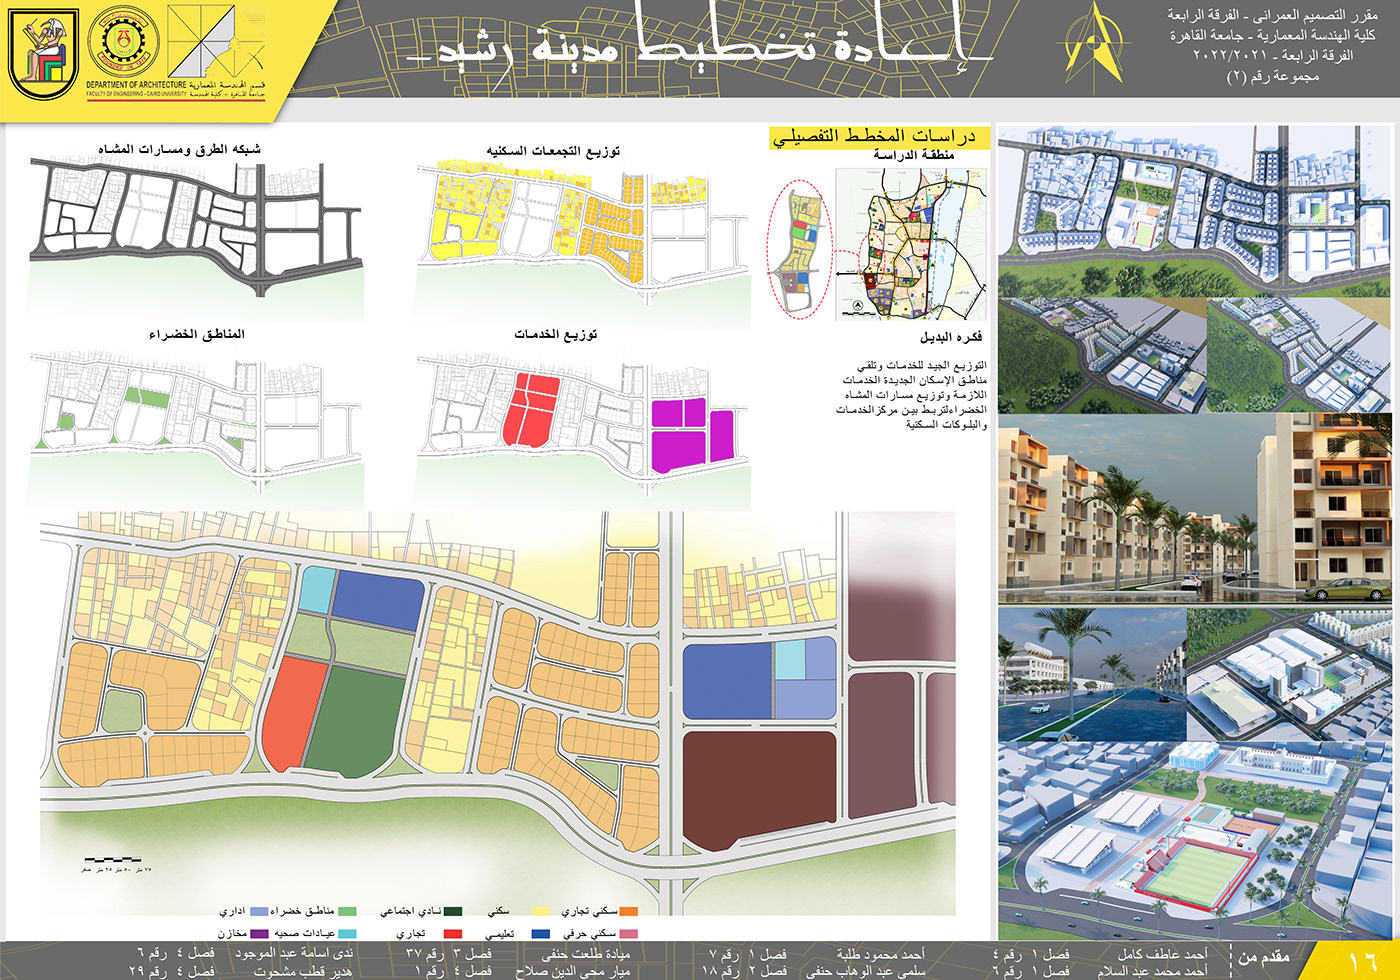 architecture city planning housing planning Urban Urban Design urban planning architectural design Urban Architecture